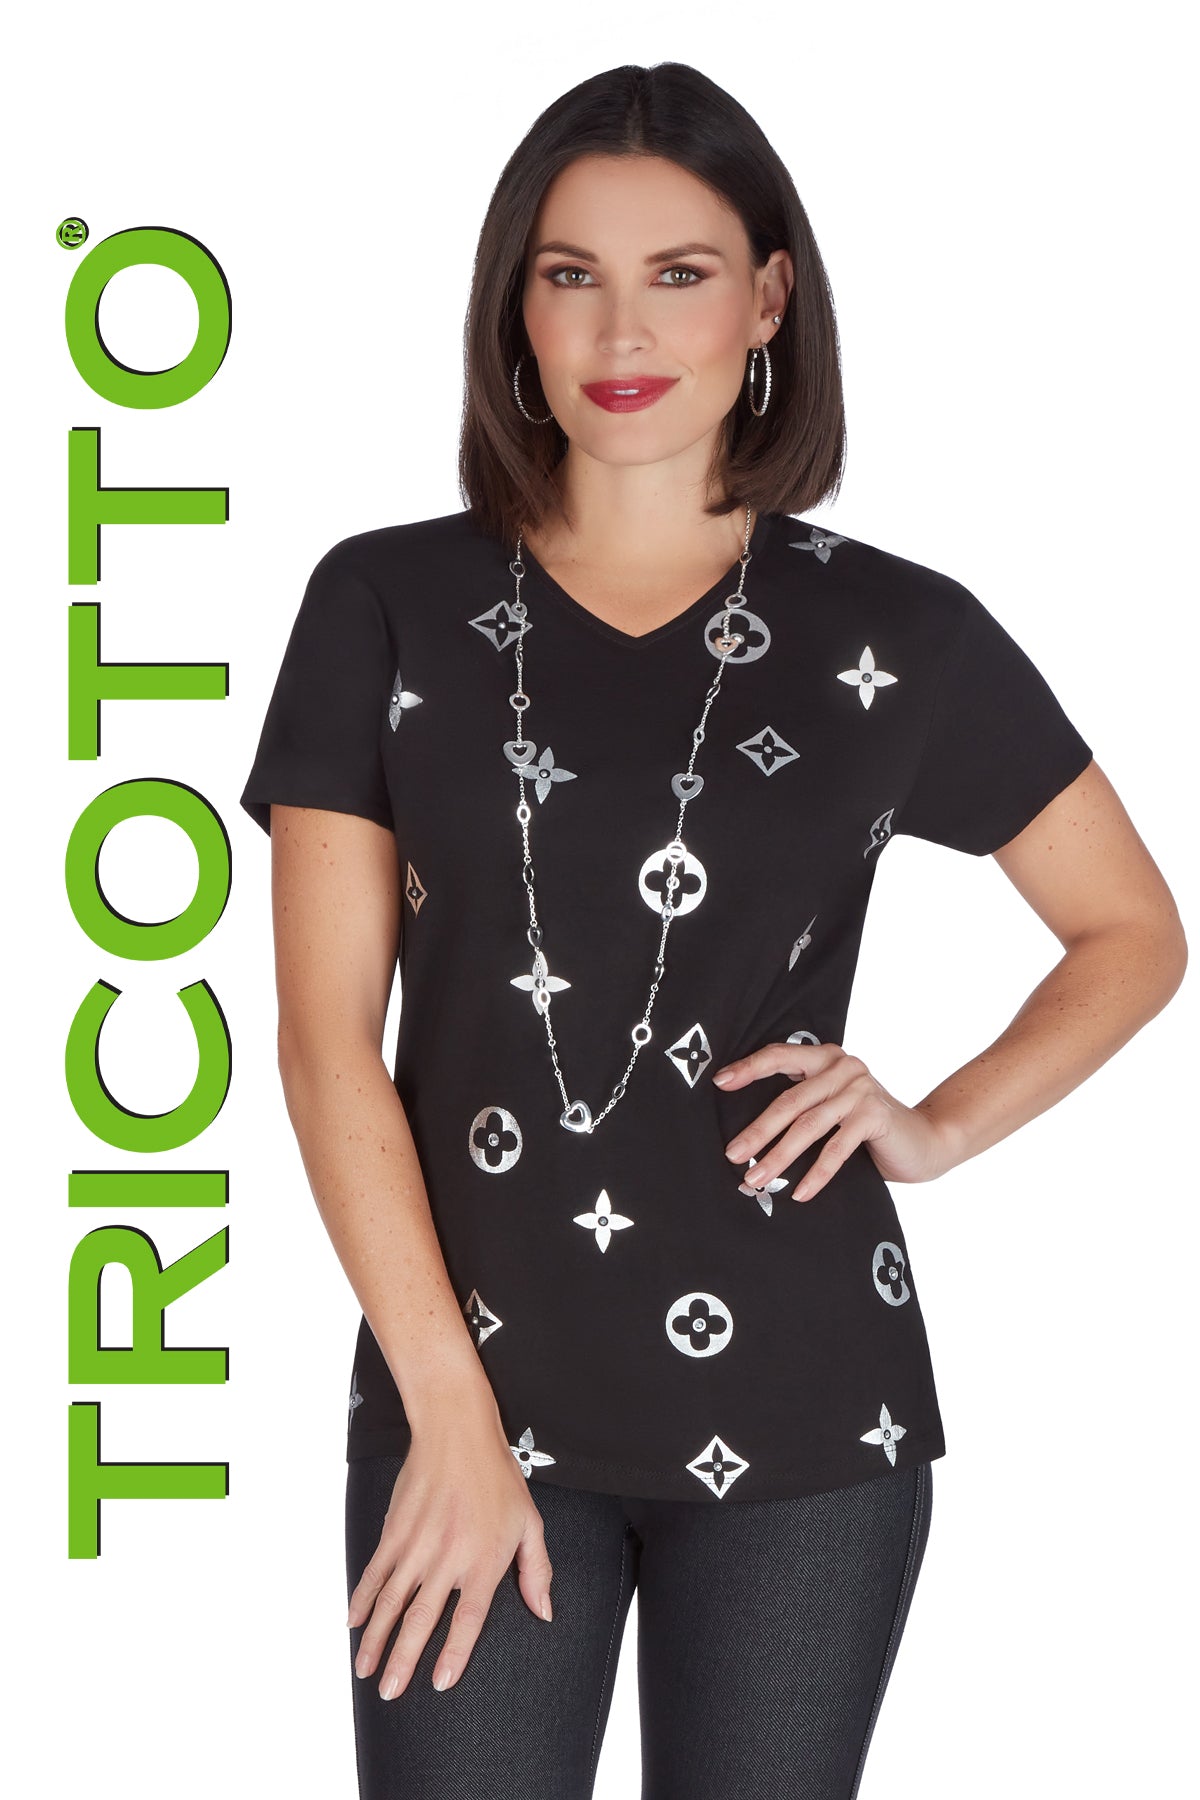 Tricotto T-shirts-Buy Tricotto T-shirts Online-Tricotto Clothing Online Quebec-Tricotto Online T-shirt Shop-Tricotto Peace-Love T-shirt